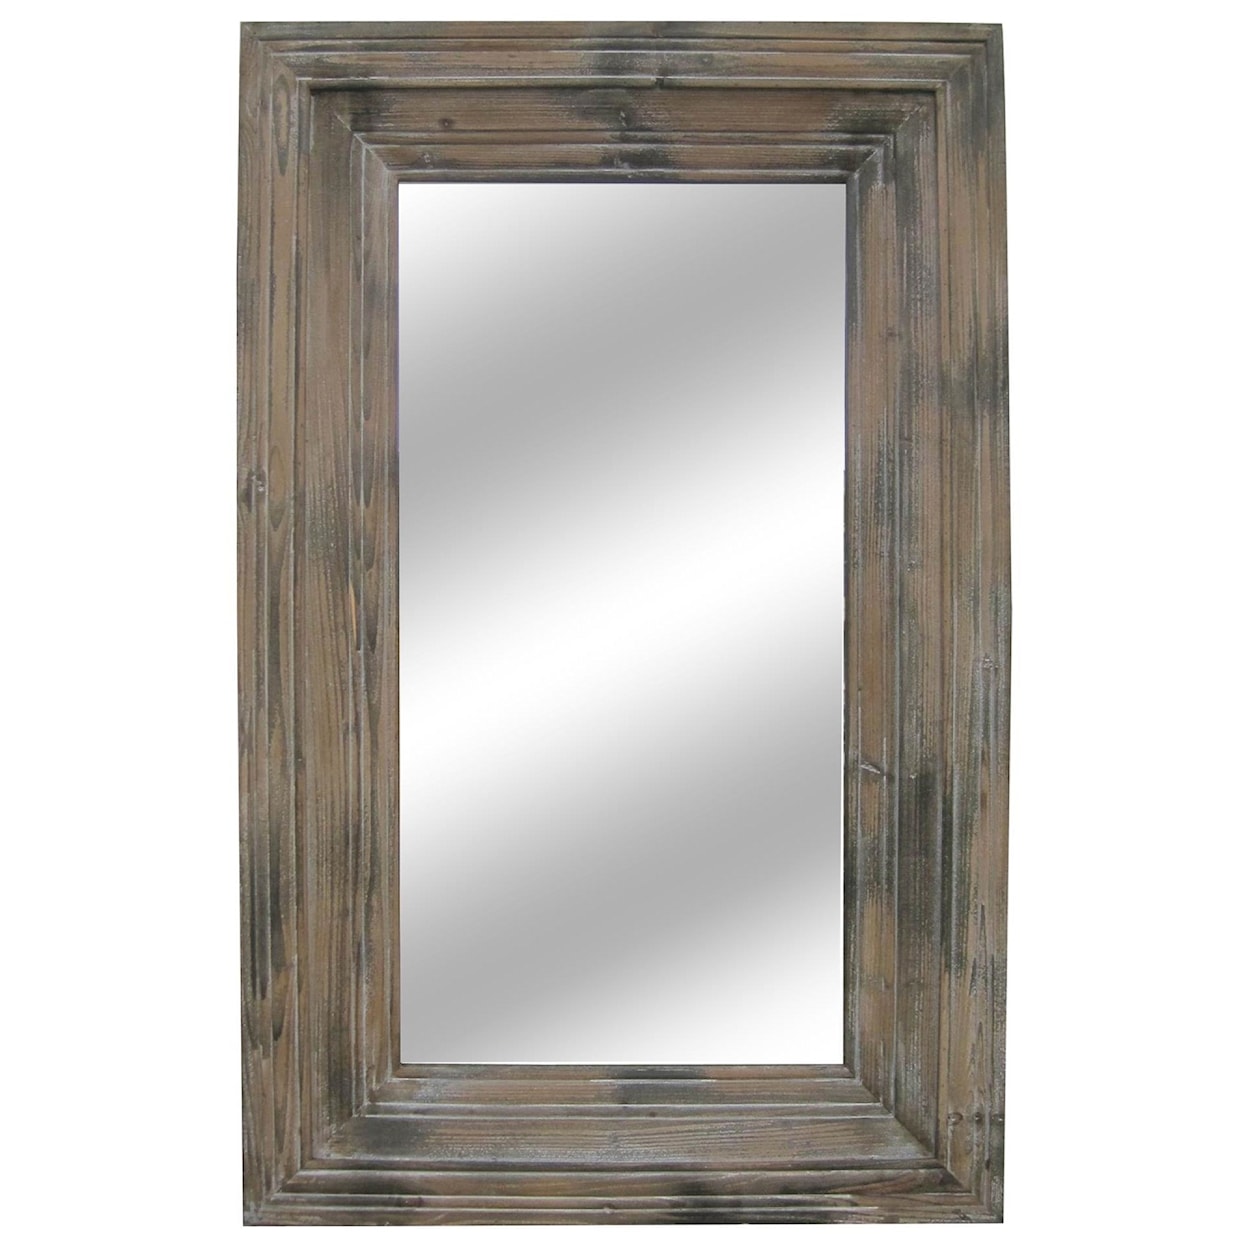 Crestview Collection Decorative Accessories Riley Wall Mirror